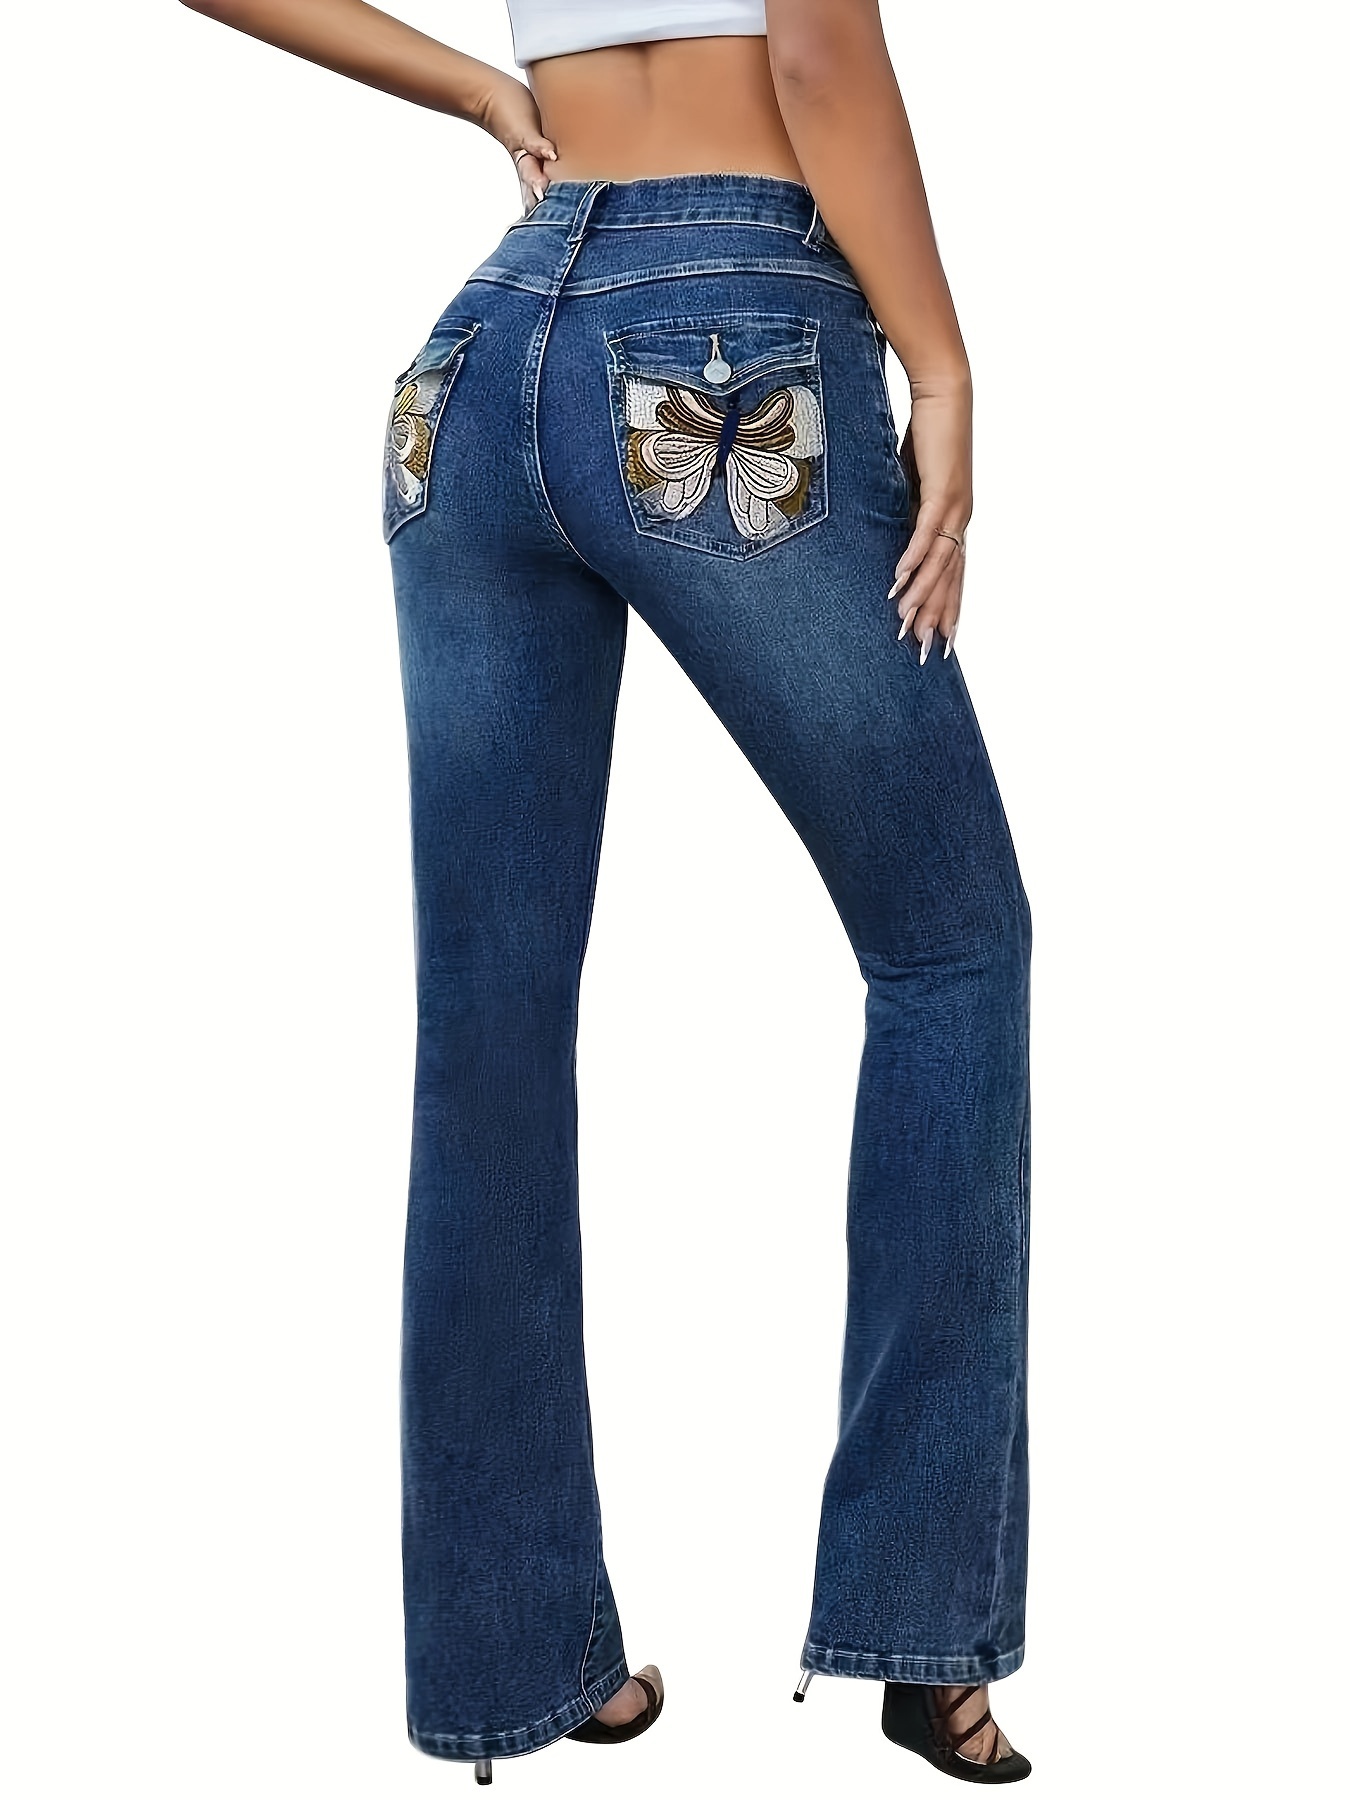 Woman Rhinestone Jeans Embroidered High Waisted Bootcut Jeans Size